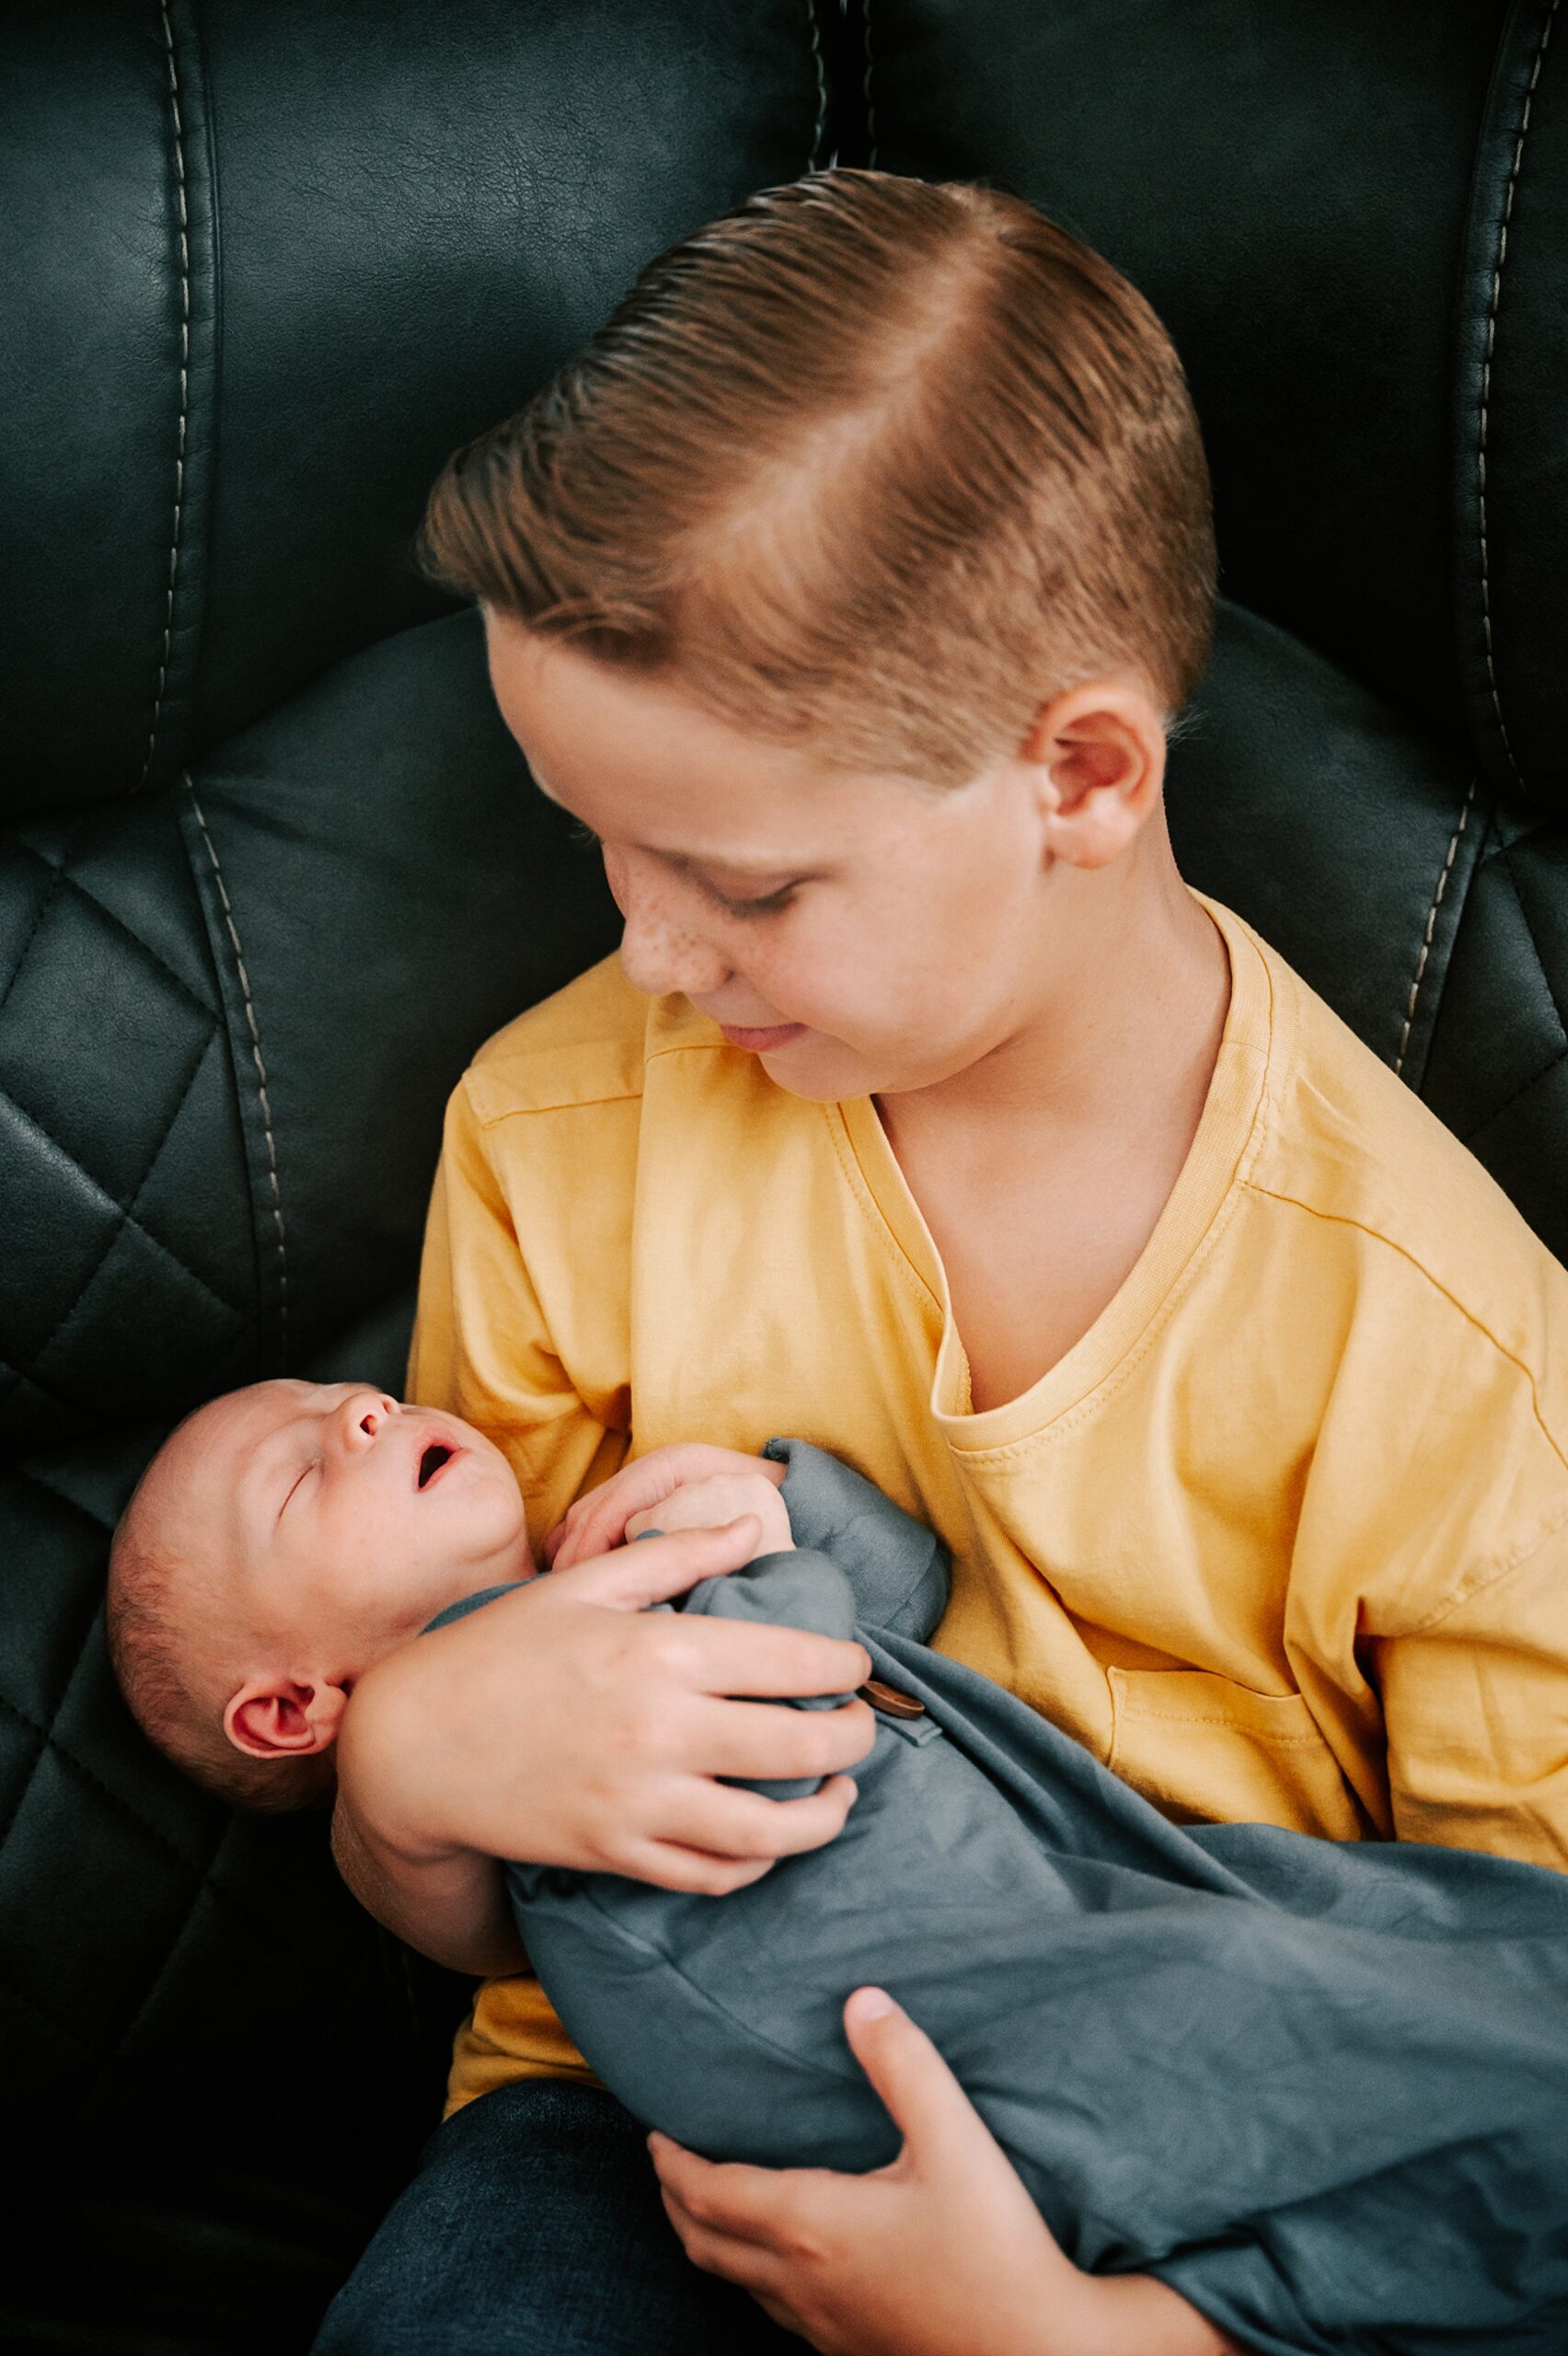 A young boy in a yellow shirt holds his sleeping newborn baby brother in his arms while sitting on a black couch